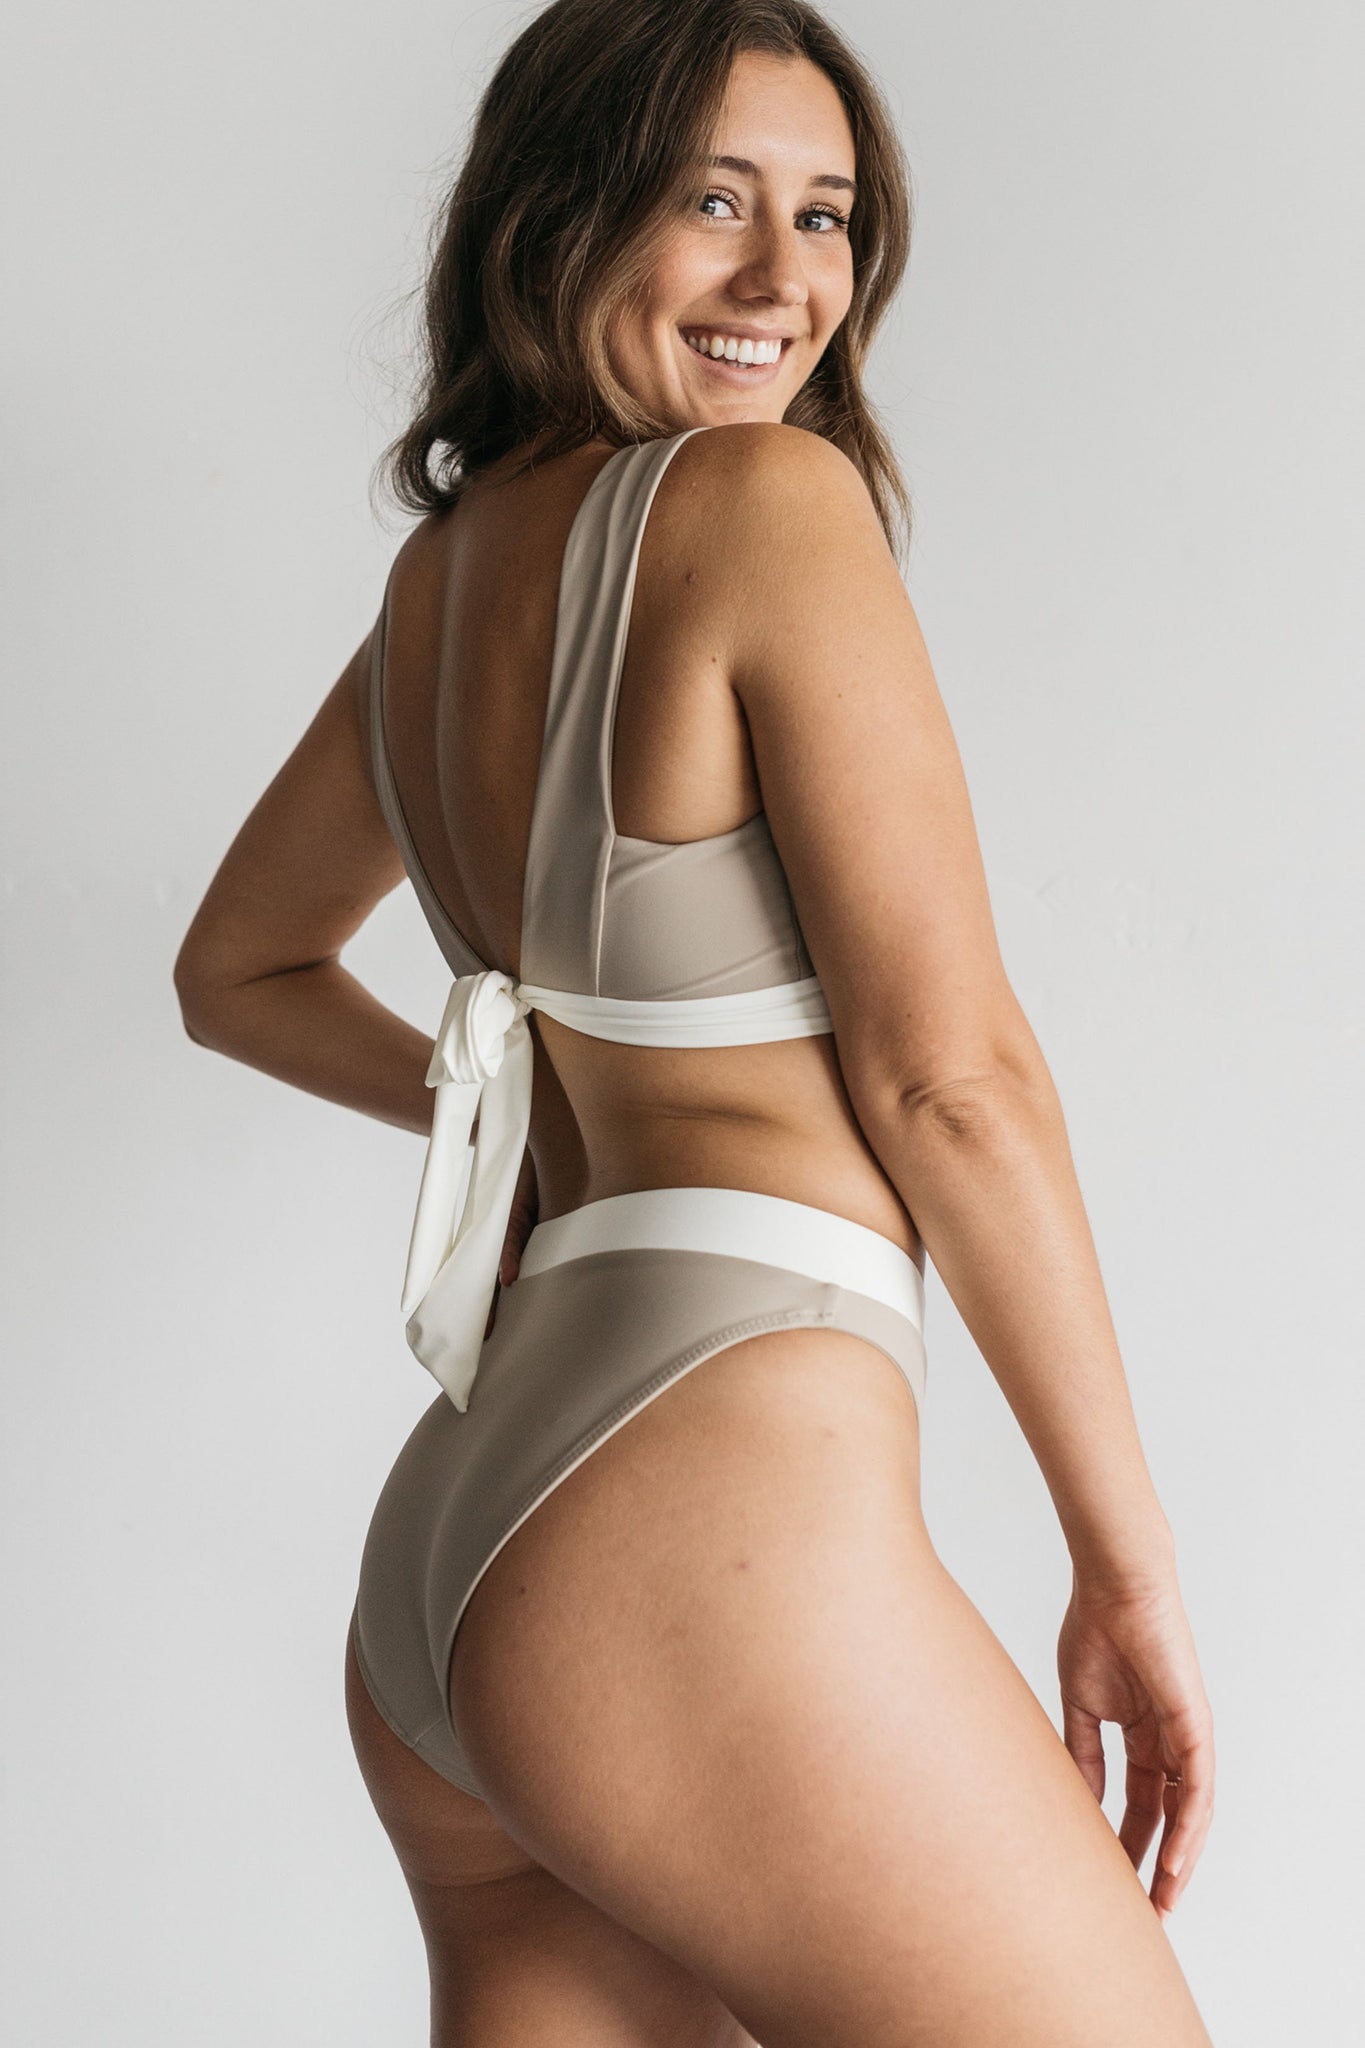 A woman smiling looking over her shoulder wearing beige bikini bottoms with a white waistband and a matching adjustable beige and white bikini top.